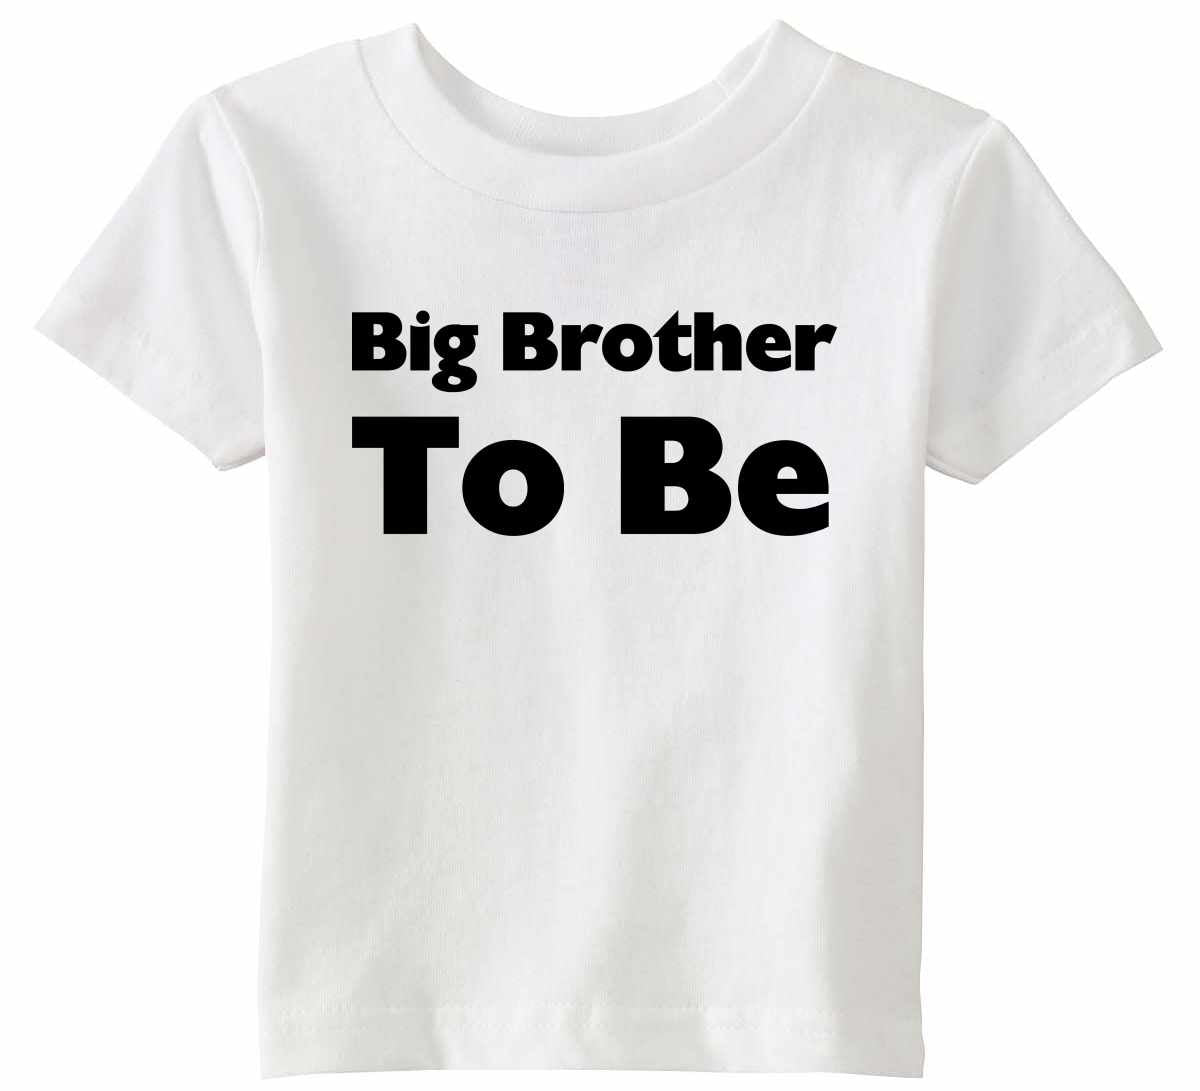 Big Brother To Be Infant/Toddler  (#863-7)